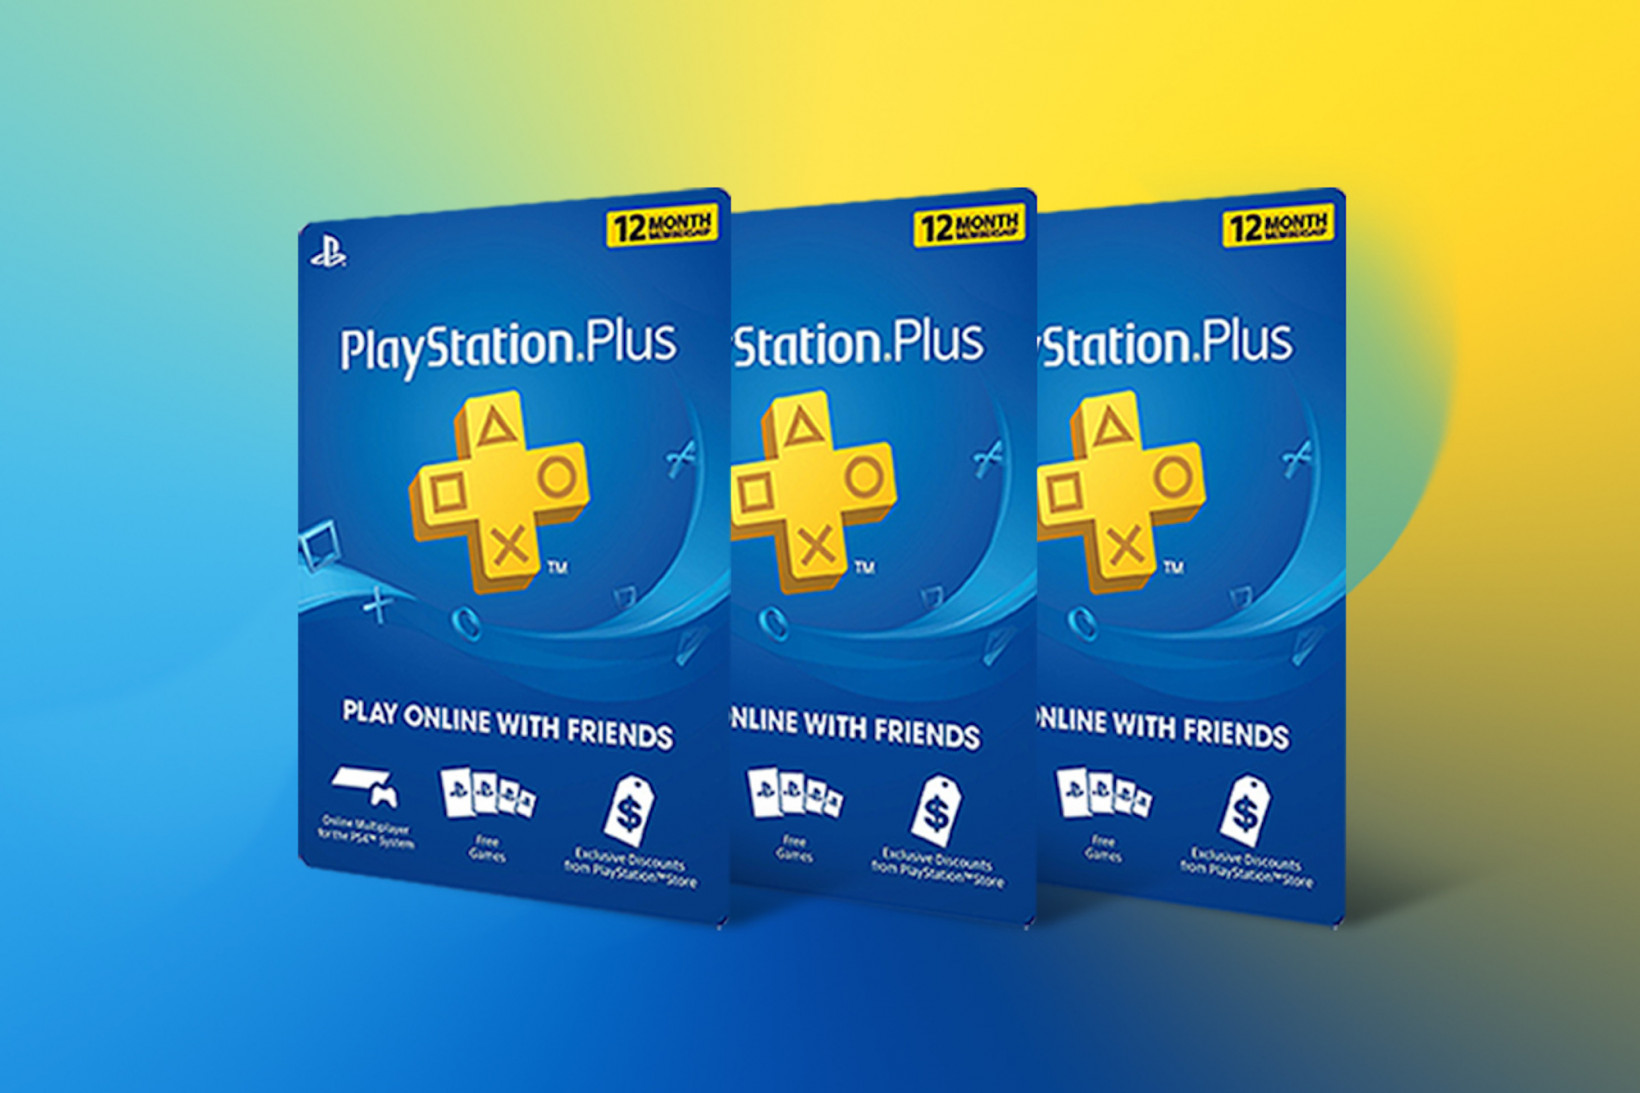 For $90, you can land three years of PlayStation Plus. How you use it is up